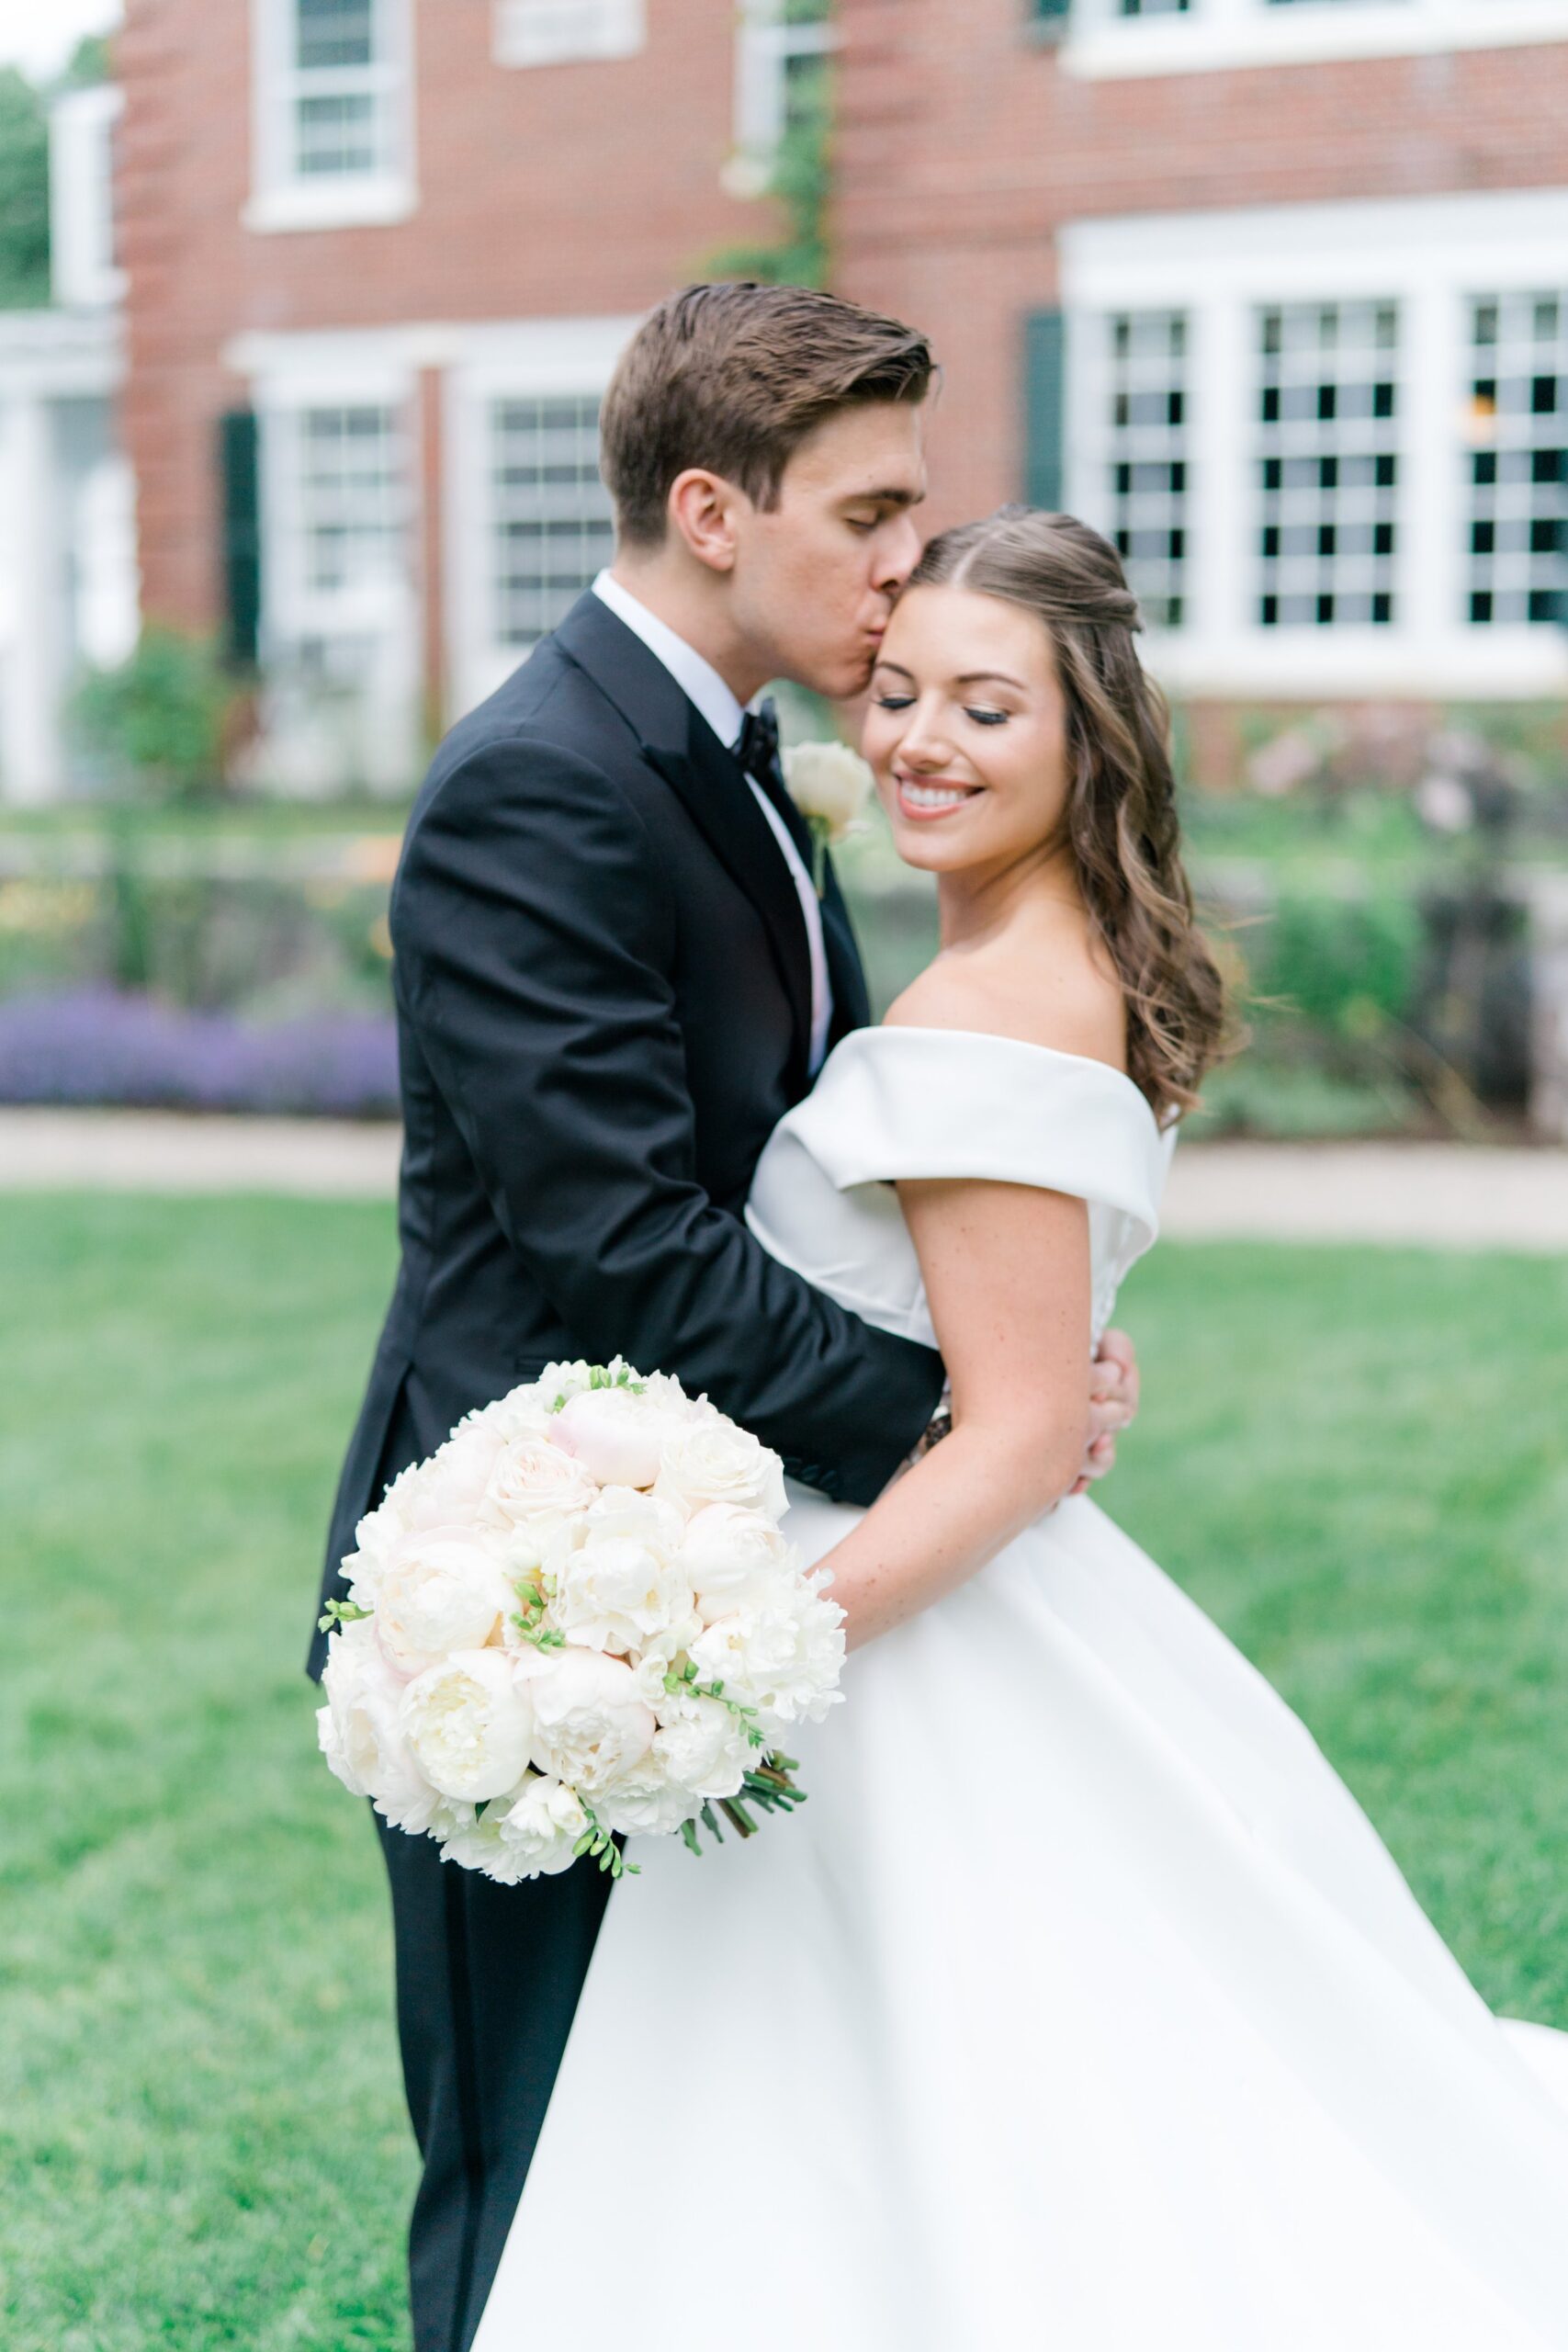 Groom kisses the temple of bride holding classic white flowers